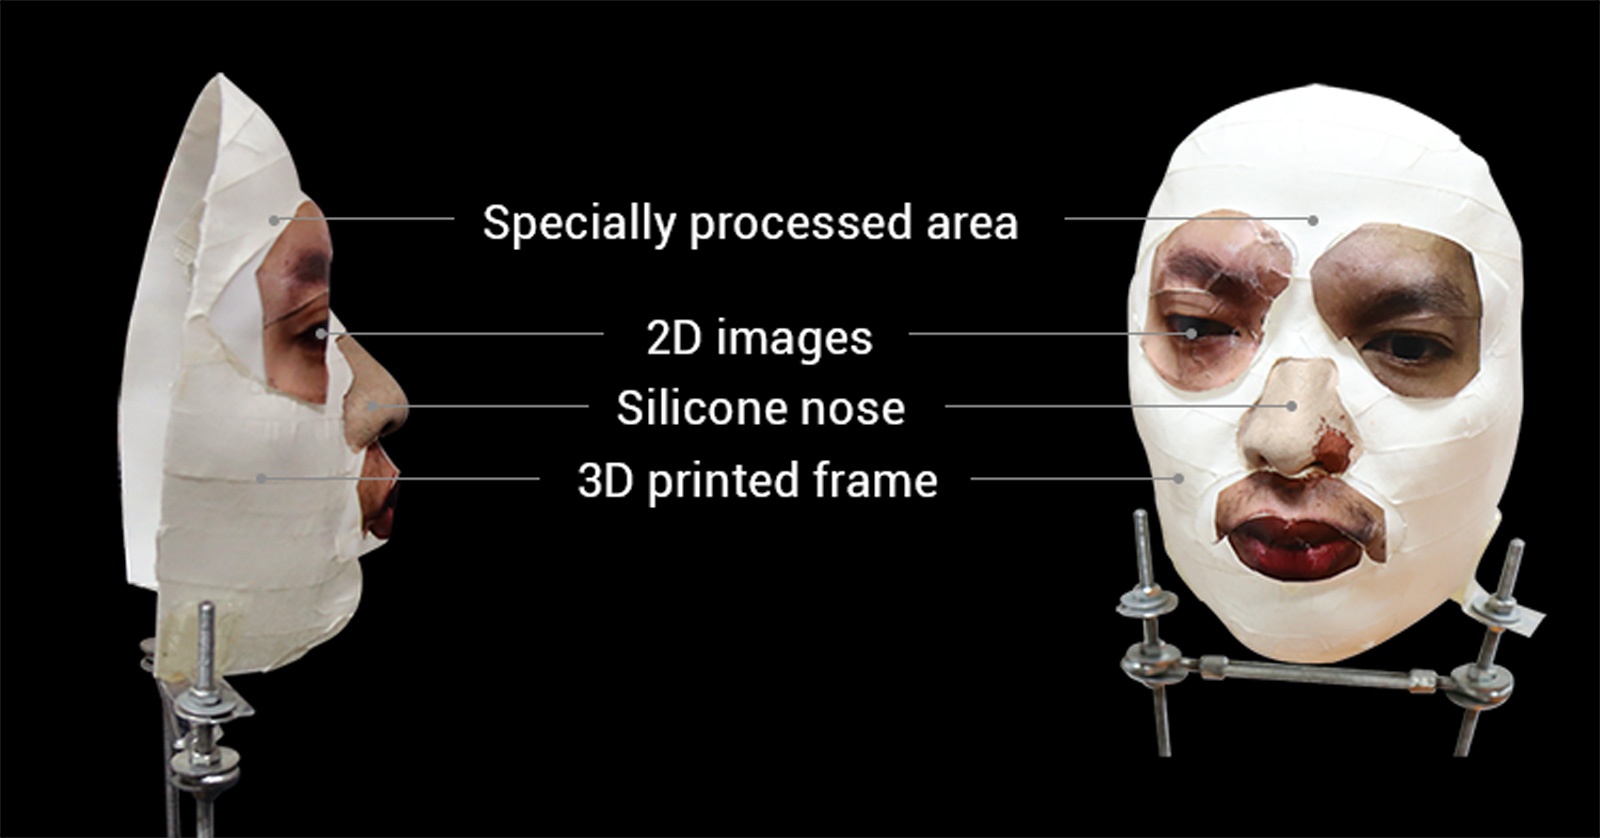 Security firm claims to thwart iPhone X’s Face ID with special mask